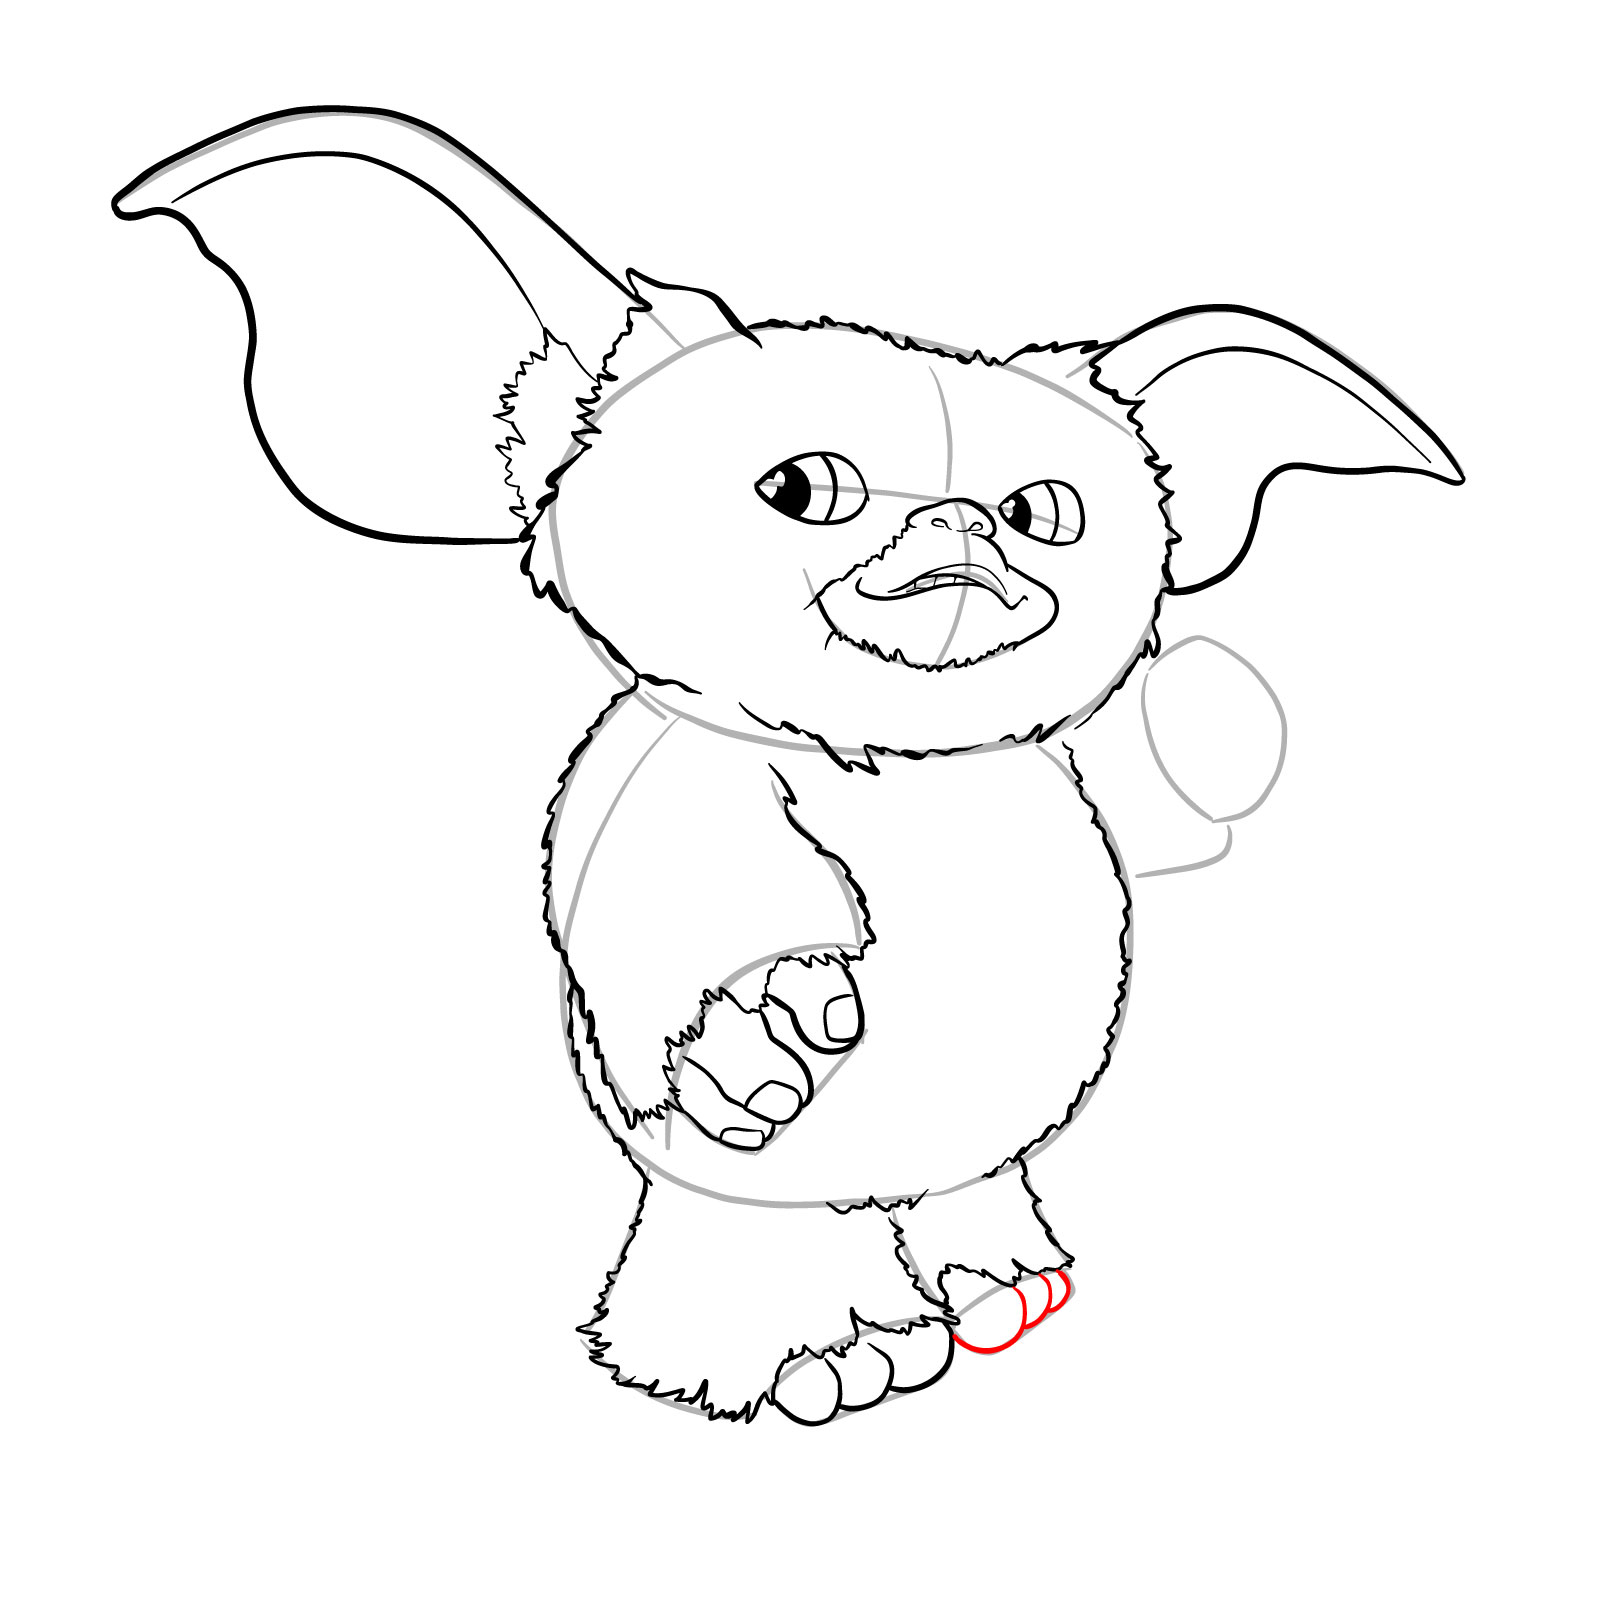 How to draw a Gremlin - step 24